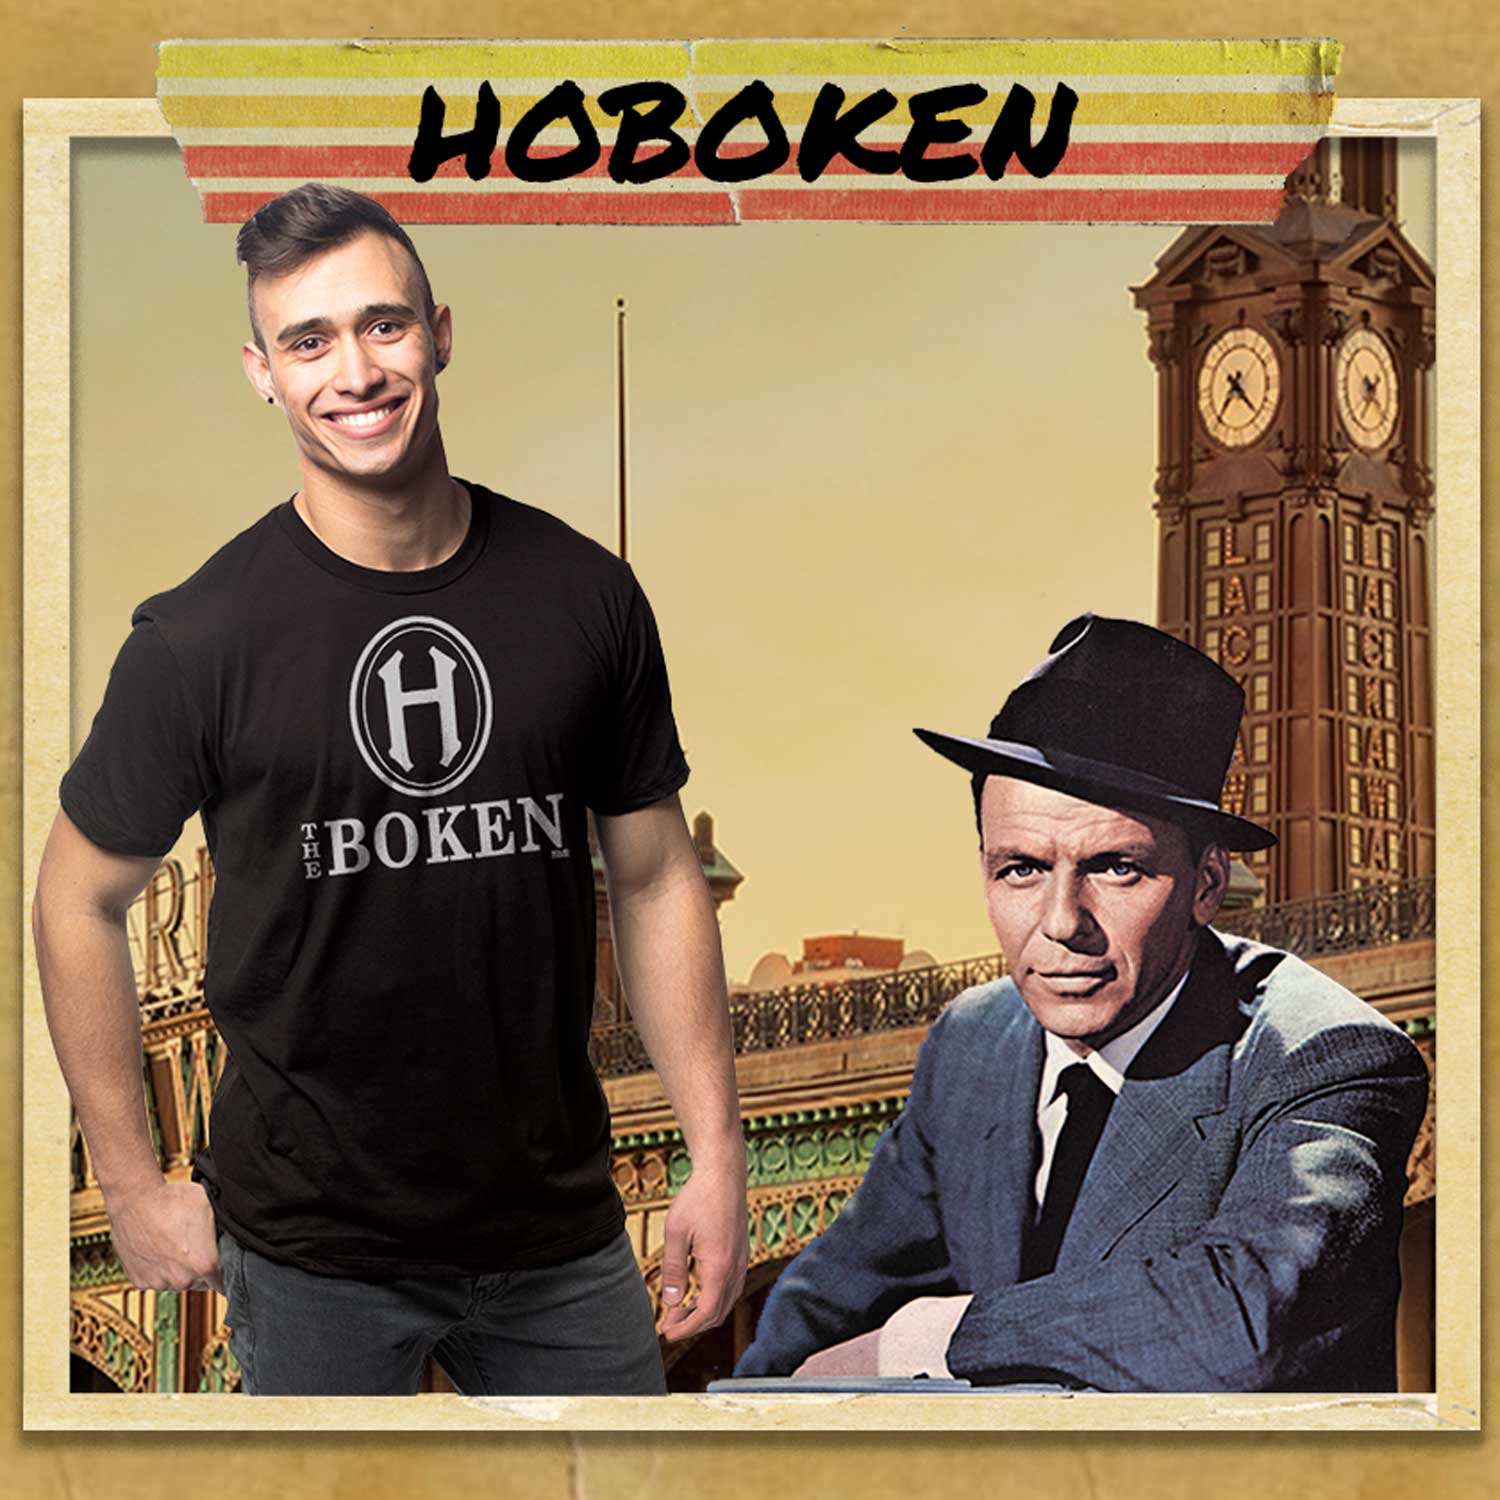 Funny Vintage Hoboken New Jersey Graphic Tees | Cool Square Mile City T-Shirts | Solid Threads